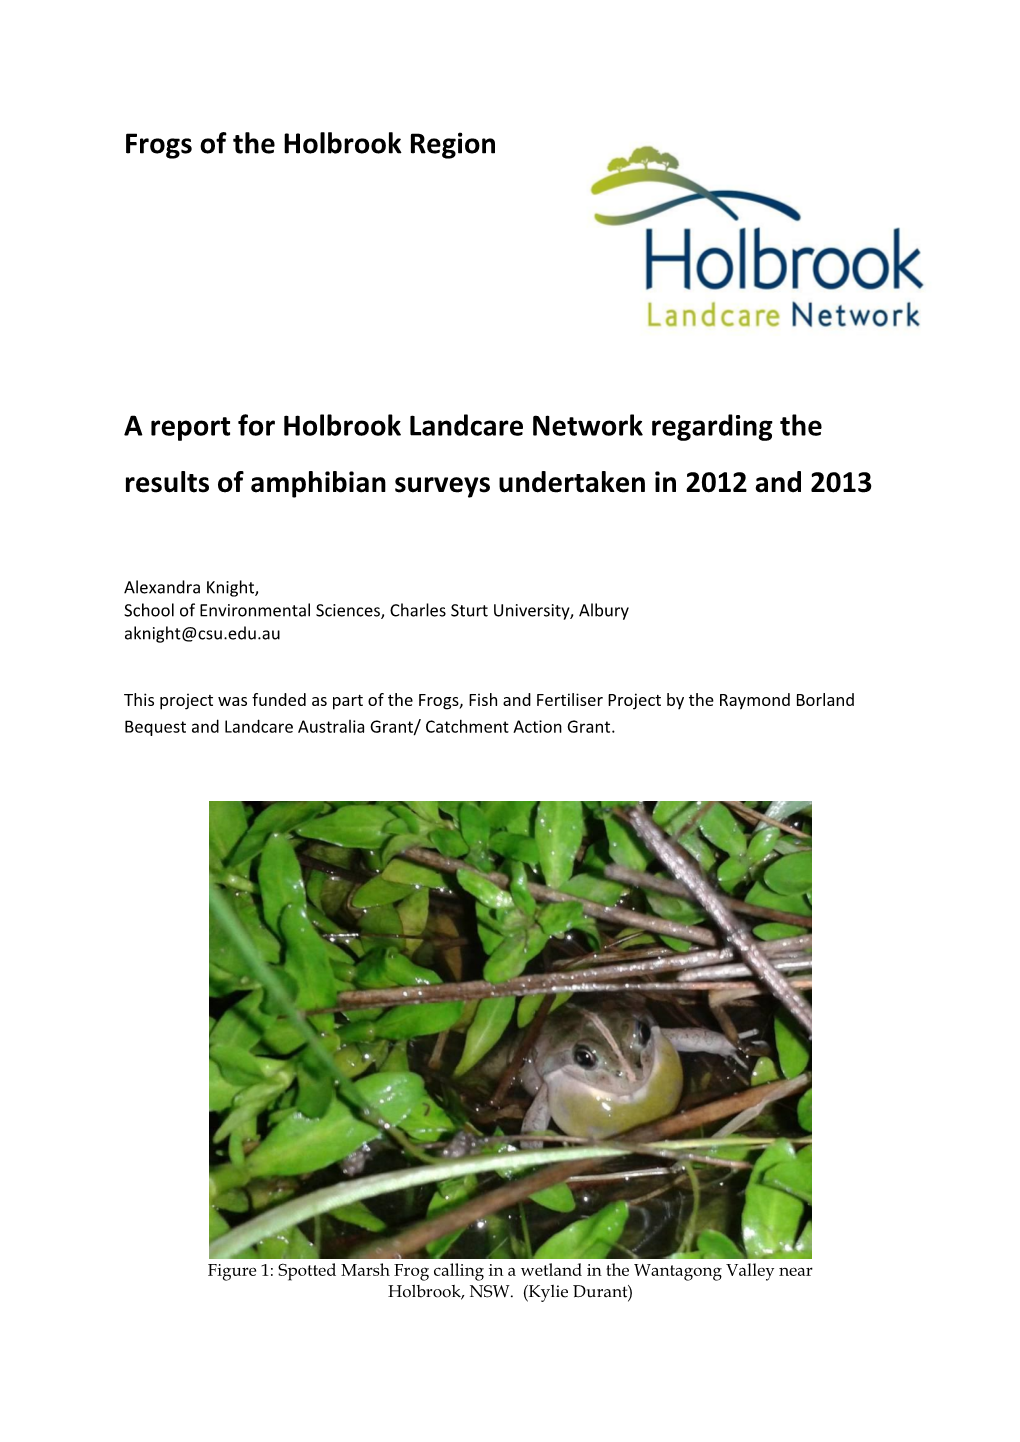 Frogs of the Holbrook Region a Report for Holbrook Landcare Network